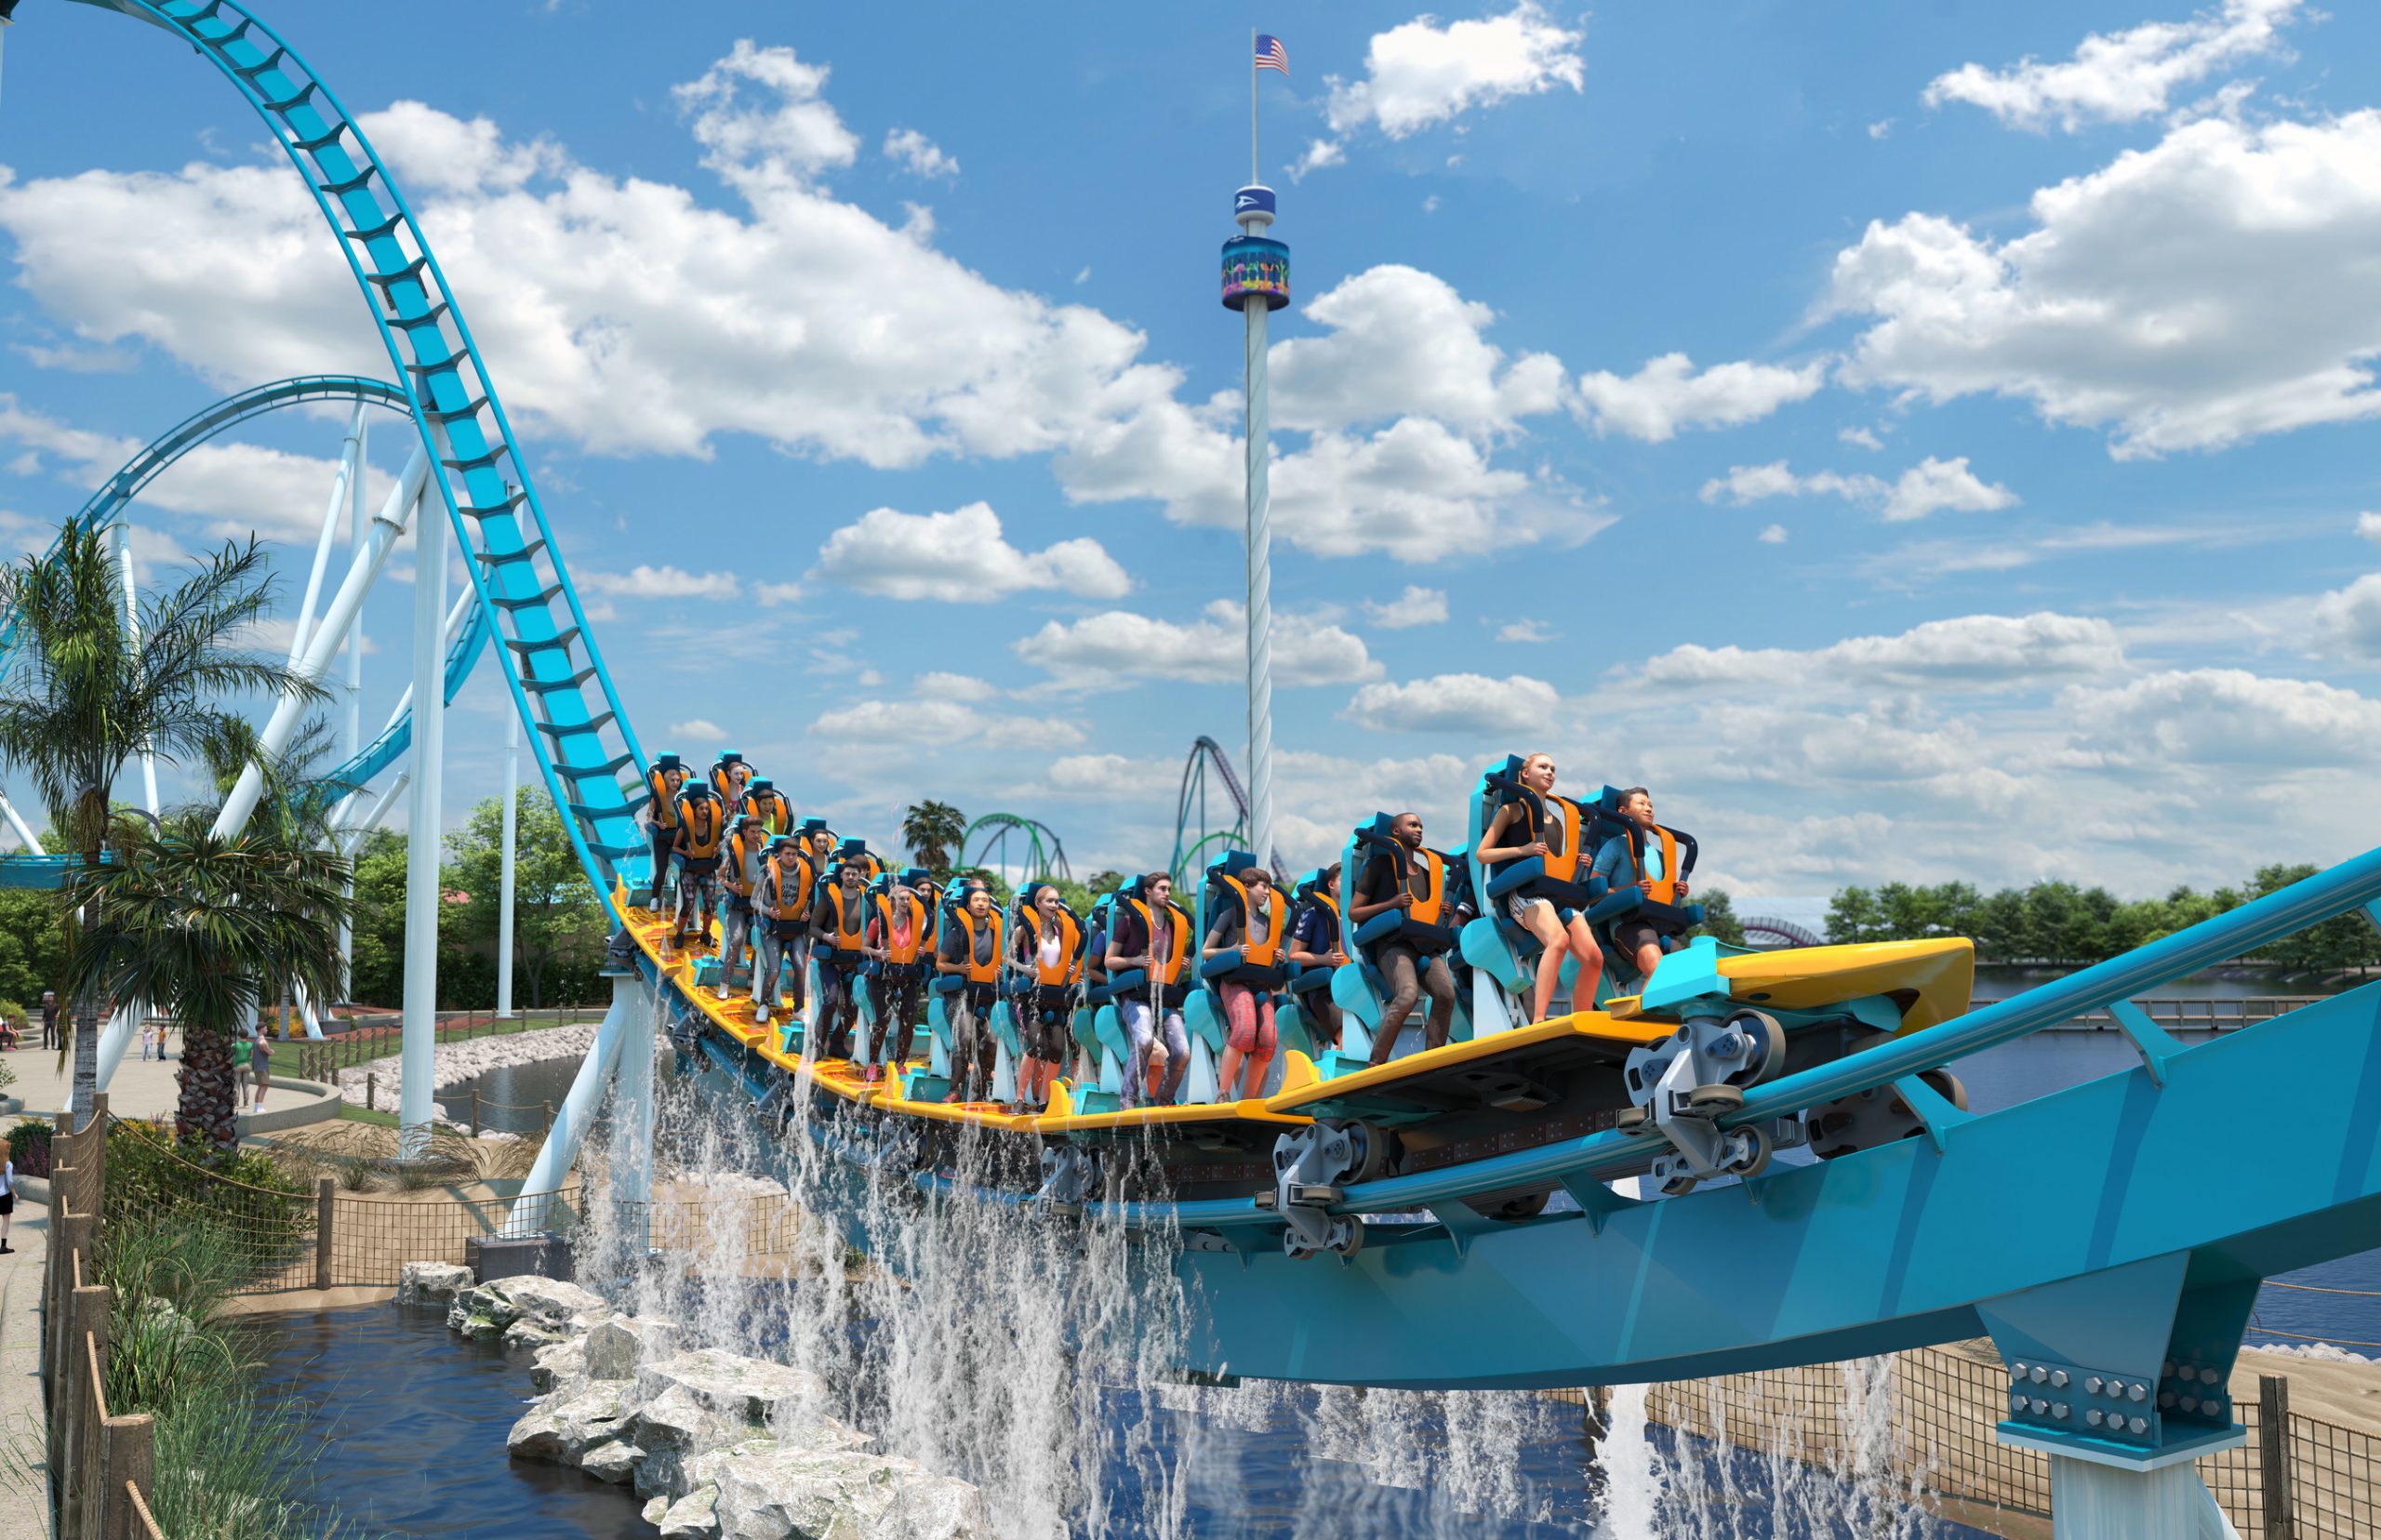 “Pipeline: The Surf Coaster” at SeaWorld Orlando will be the world’s first surf coaster offering riders a unique experience that mimics the movement and motion of surfing